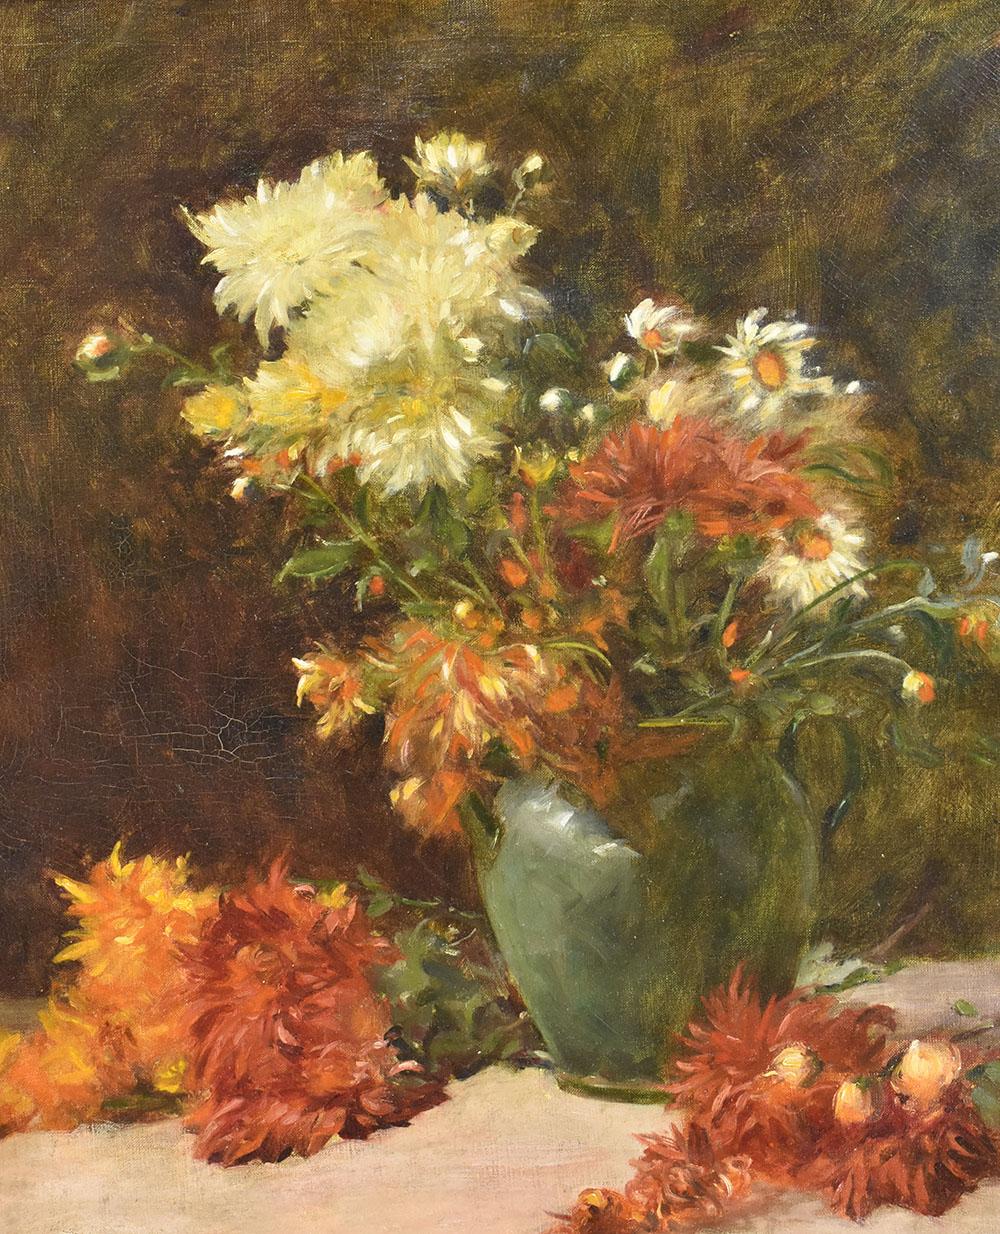 Flowers artwork, antique oil painting, Still Life, floral vase painting which represents Dahlias And Daisies. 
Beautifull paintings of red, rose and white peonies, oil painting on canvas of the Nineteenth Century.  
It also has an original gold